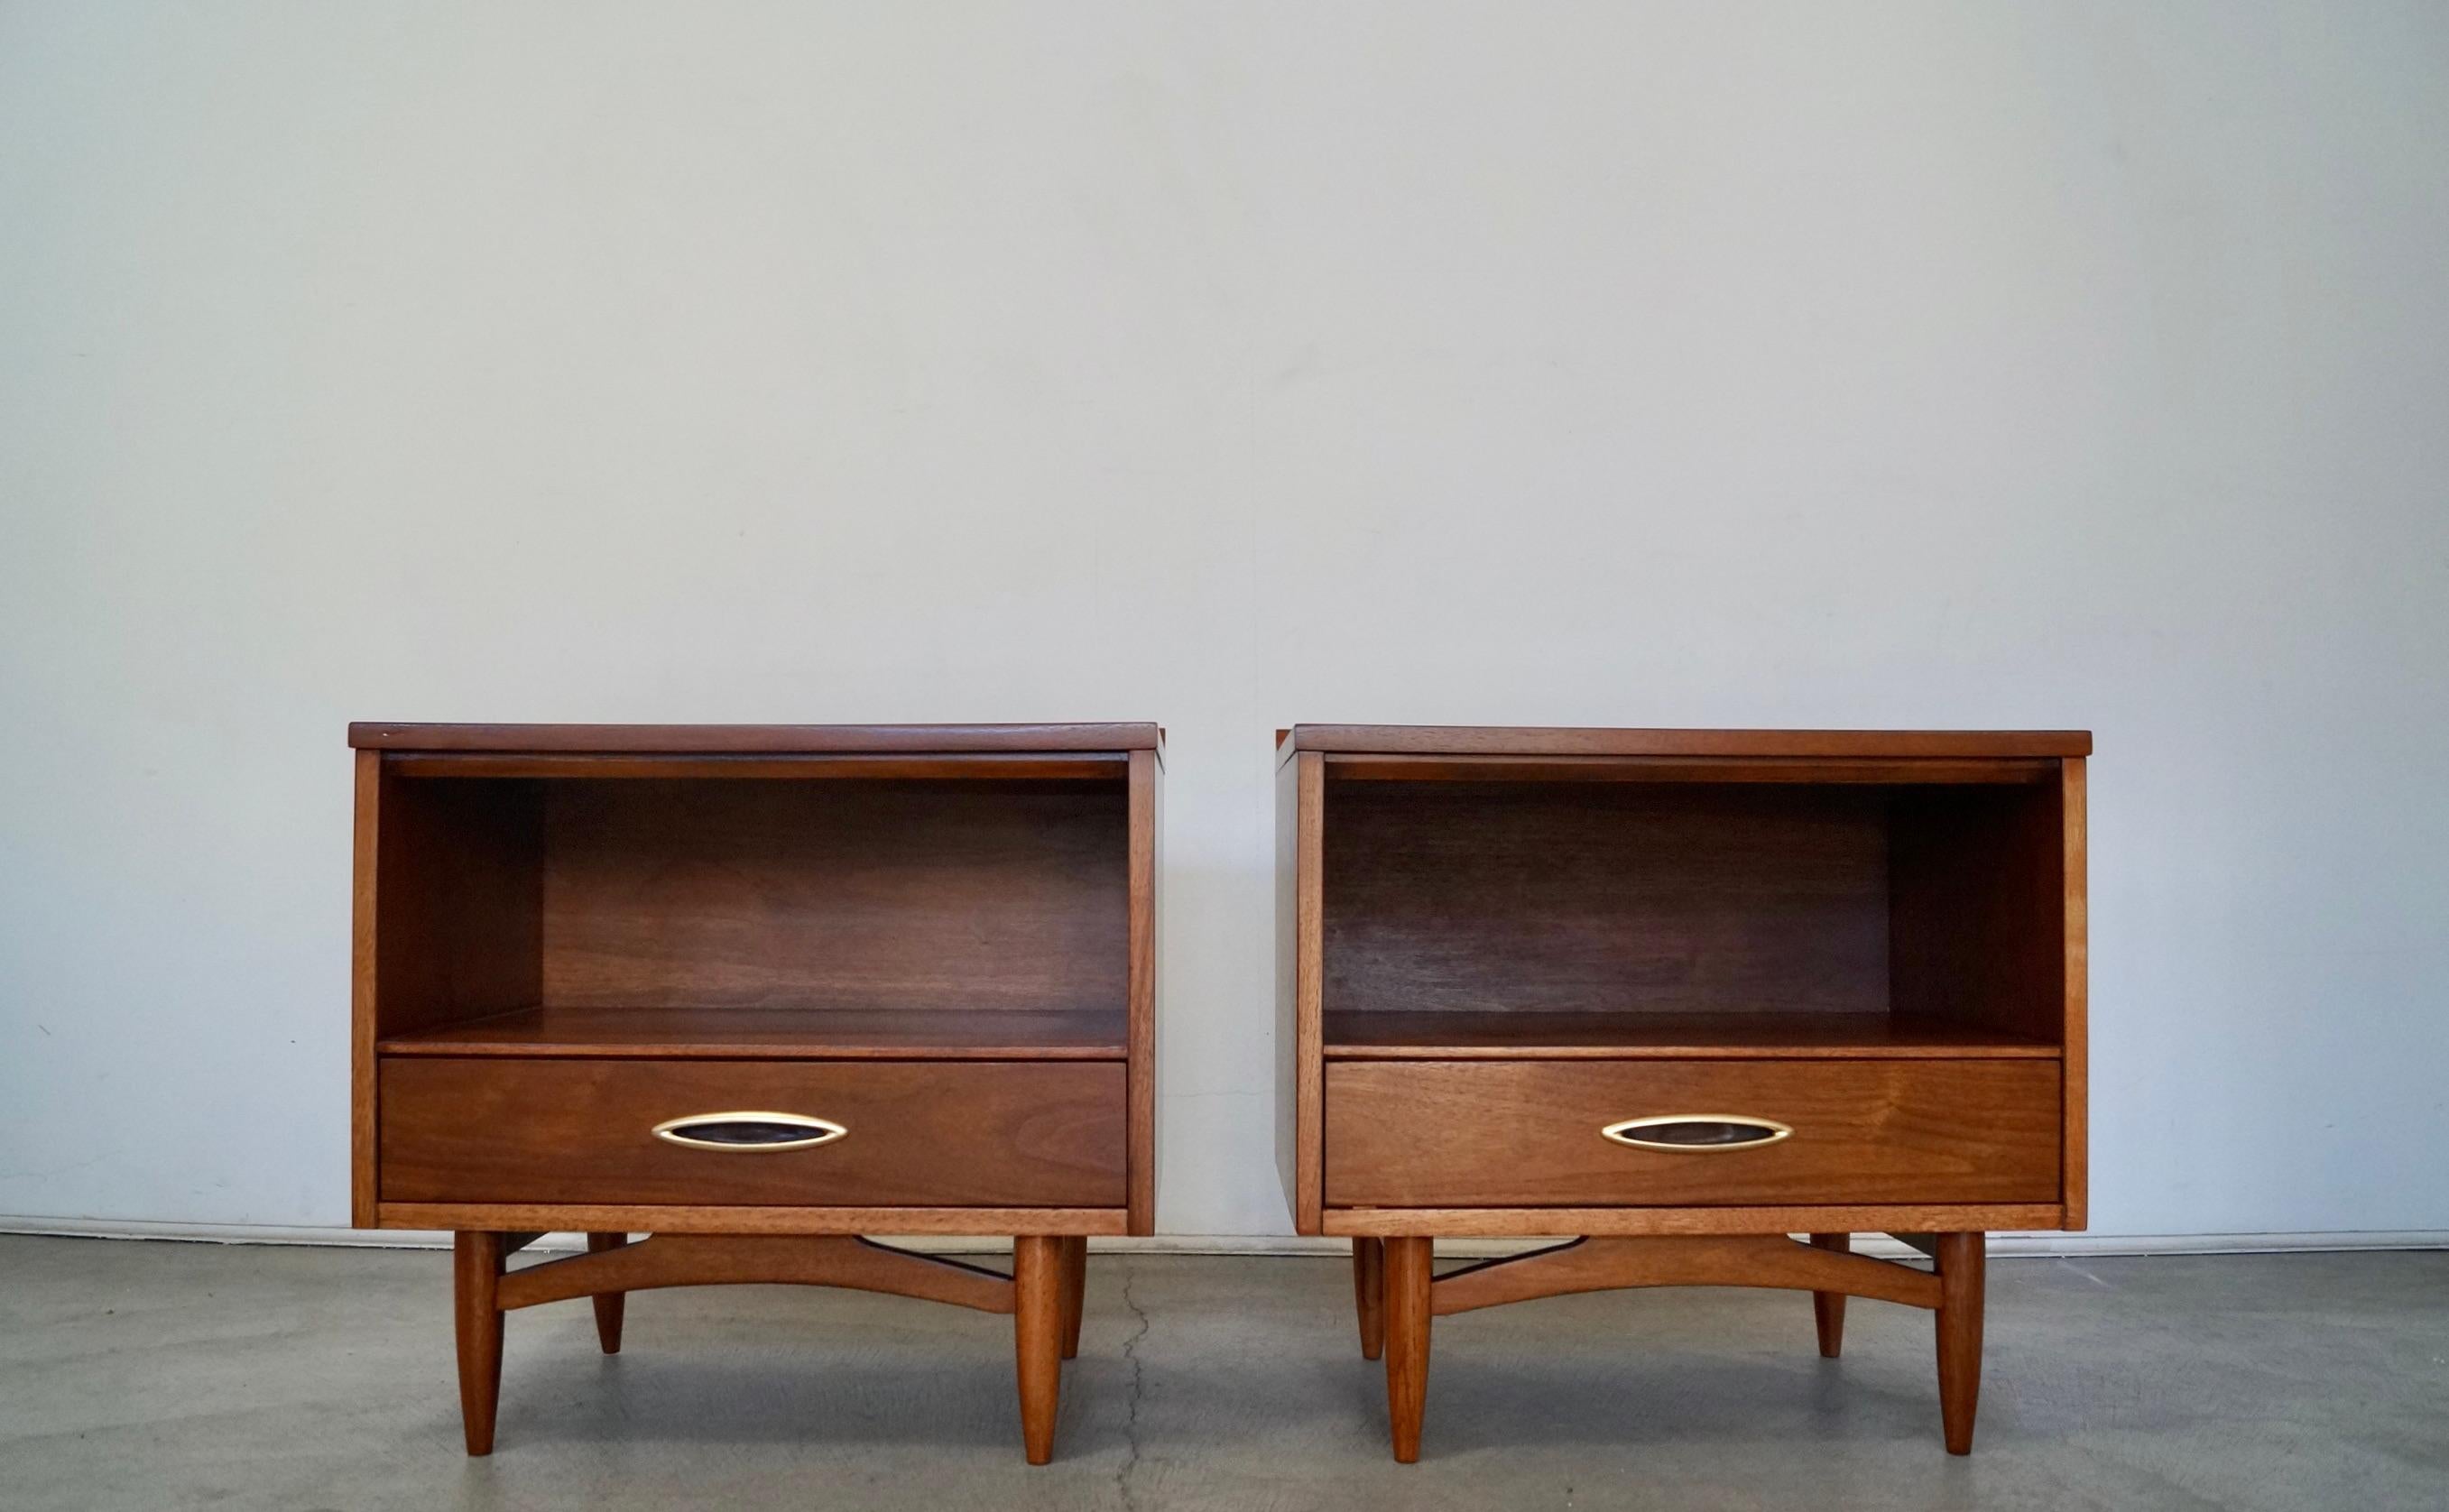 Vintage 1950's Mid-Century Modern night stands for sale. Manufactured by Broyhill, and part of the Sculptra series. They have been professionally refinished, and are made of walnut. They have the original recessed handles in a brass finish. They are